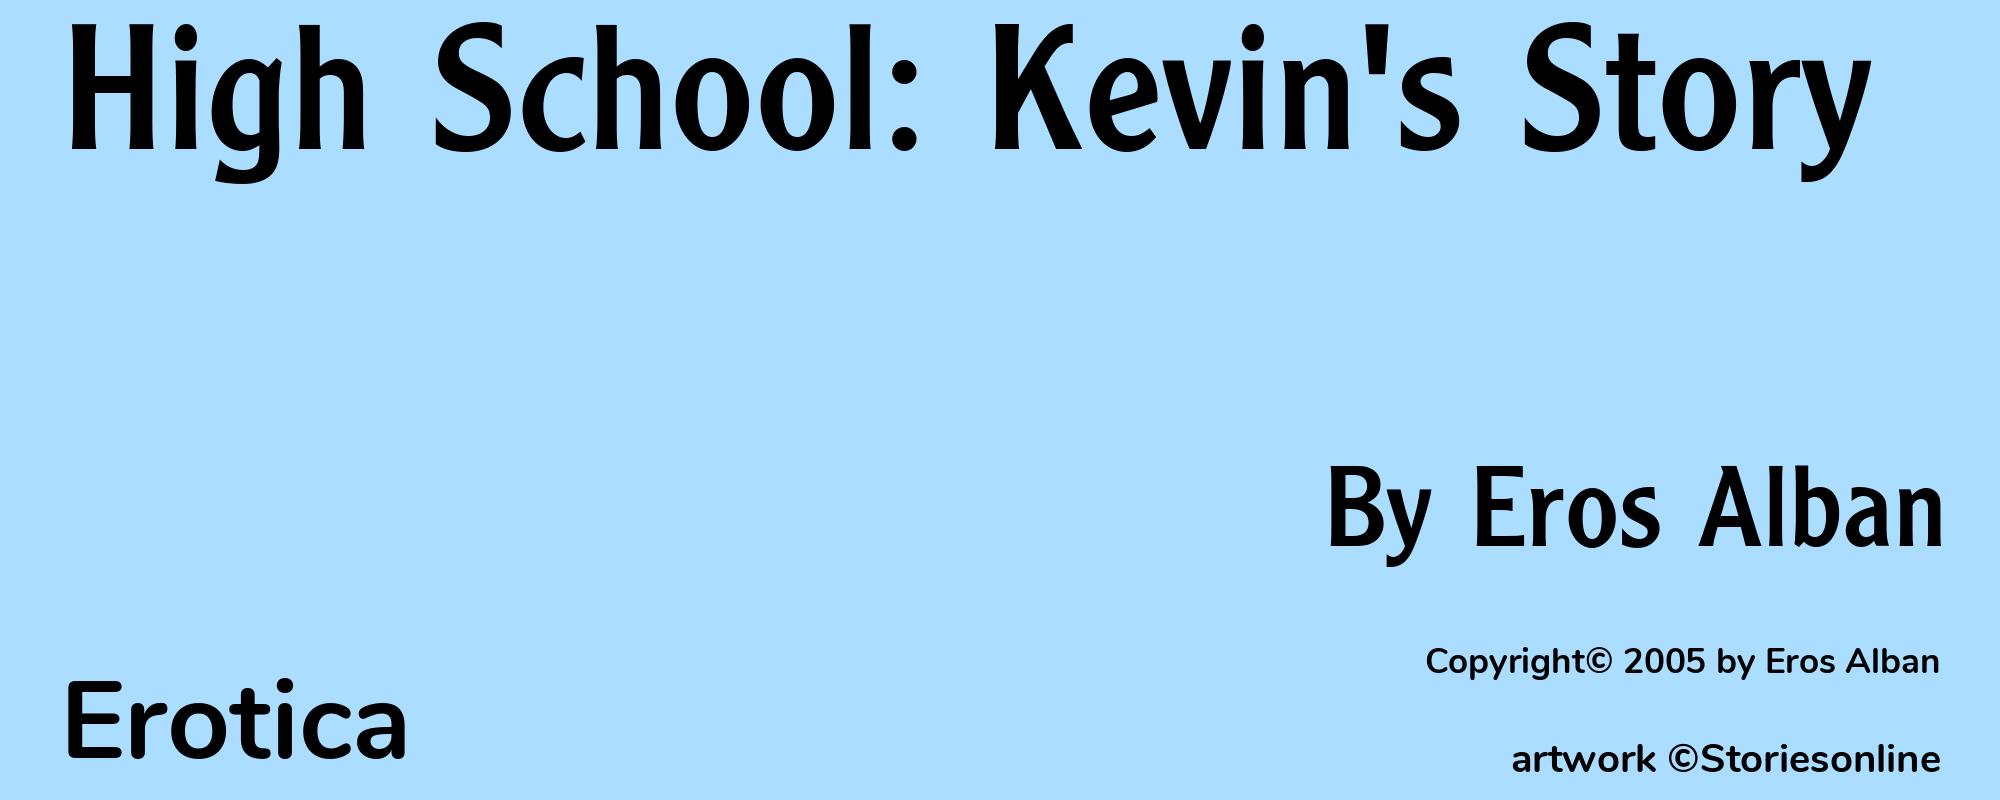 High School: Kevin's Story - Cover